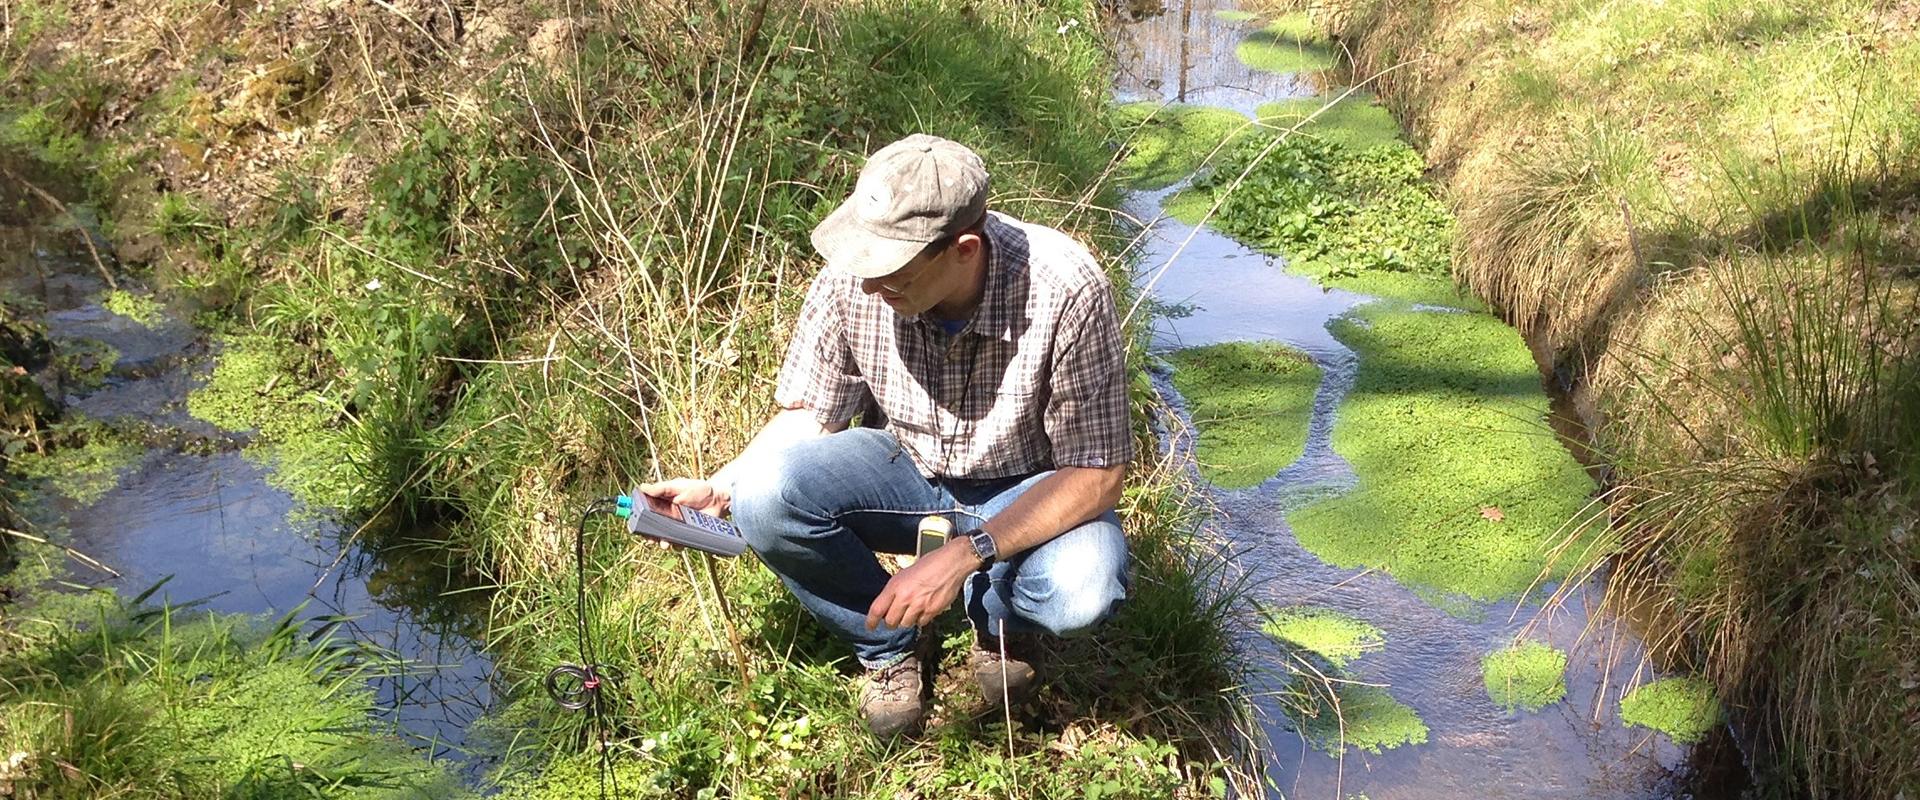 In-situ measurements of physico-chemical parameters in the Loire basin